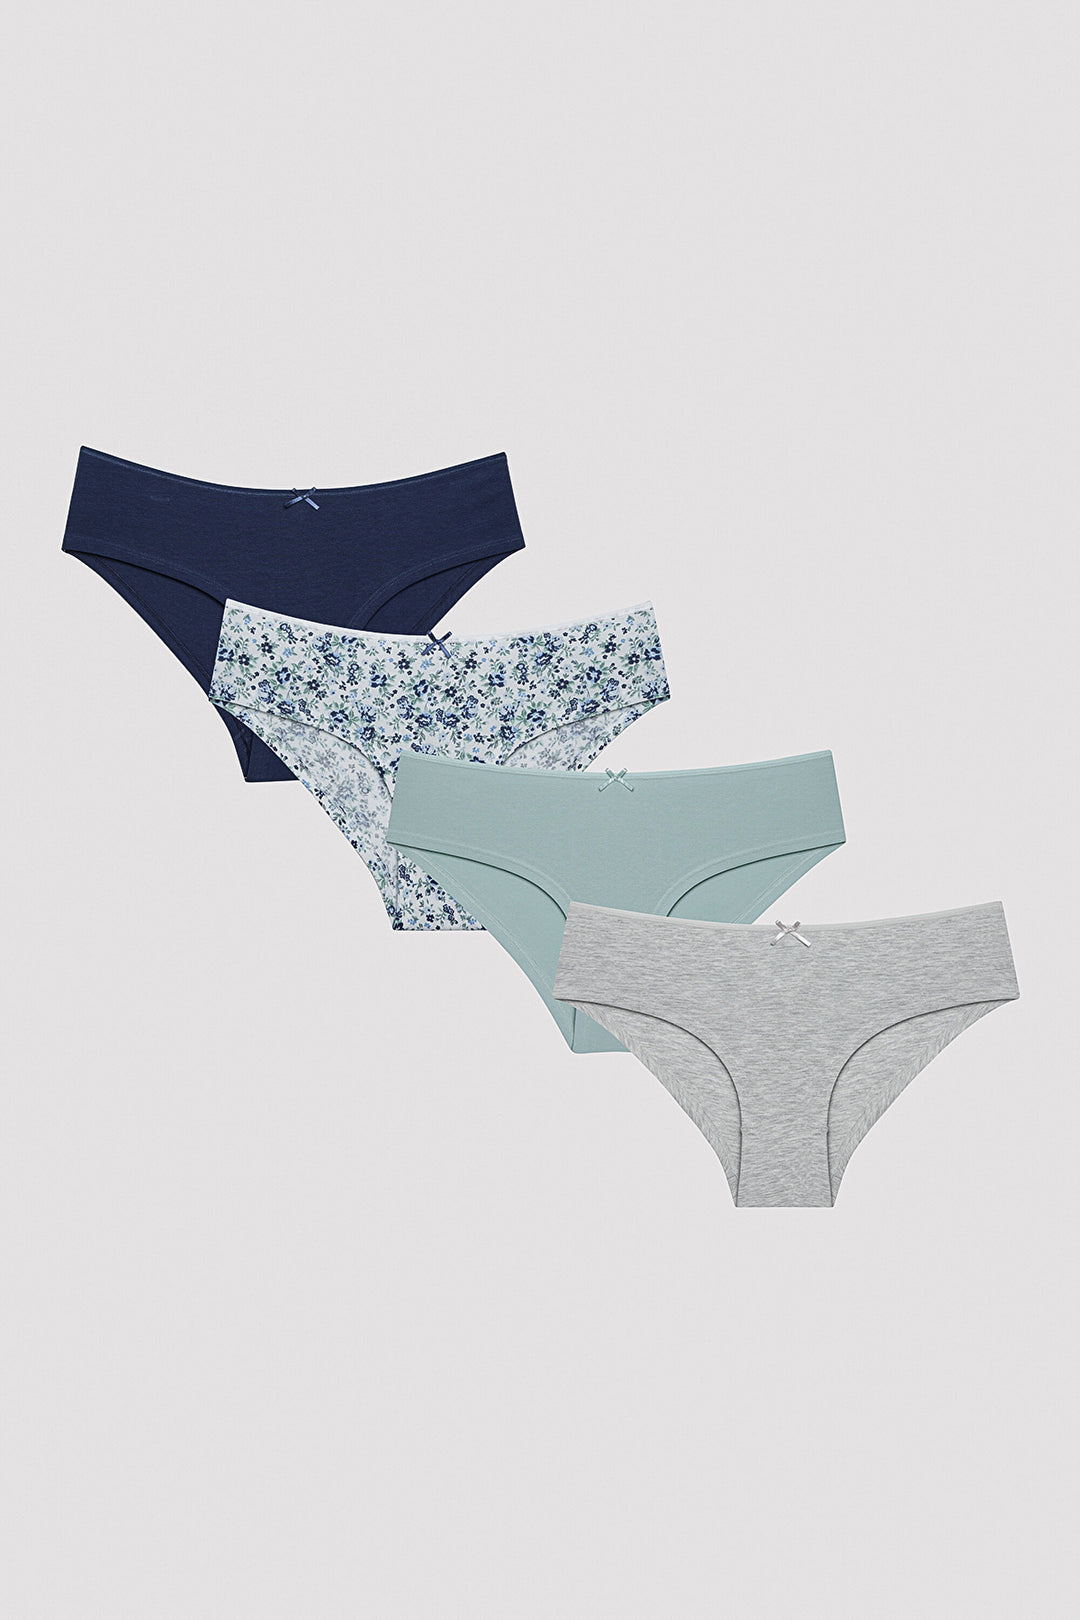 Penti.kuwait - Teen Imagine 3's Hipster Panties will add a more stylish  touch to girls' style! Teen Imagine 3's Hipster Panties, consisting of 3  panties in black, grey and pink, is the